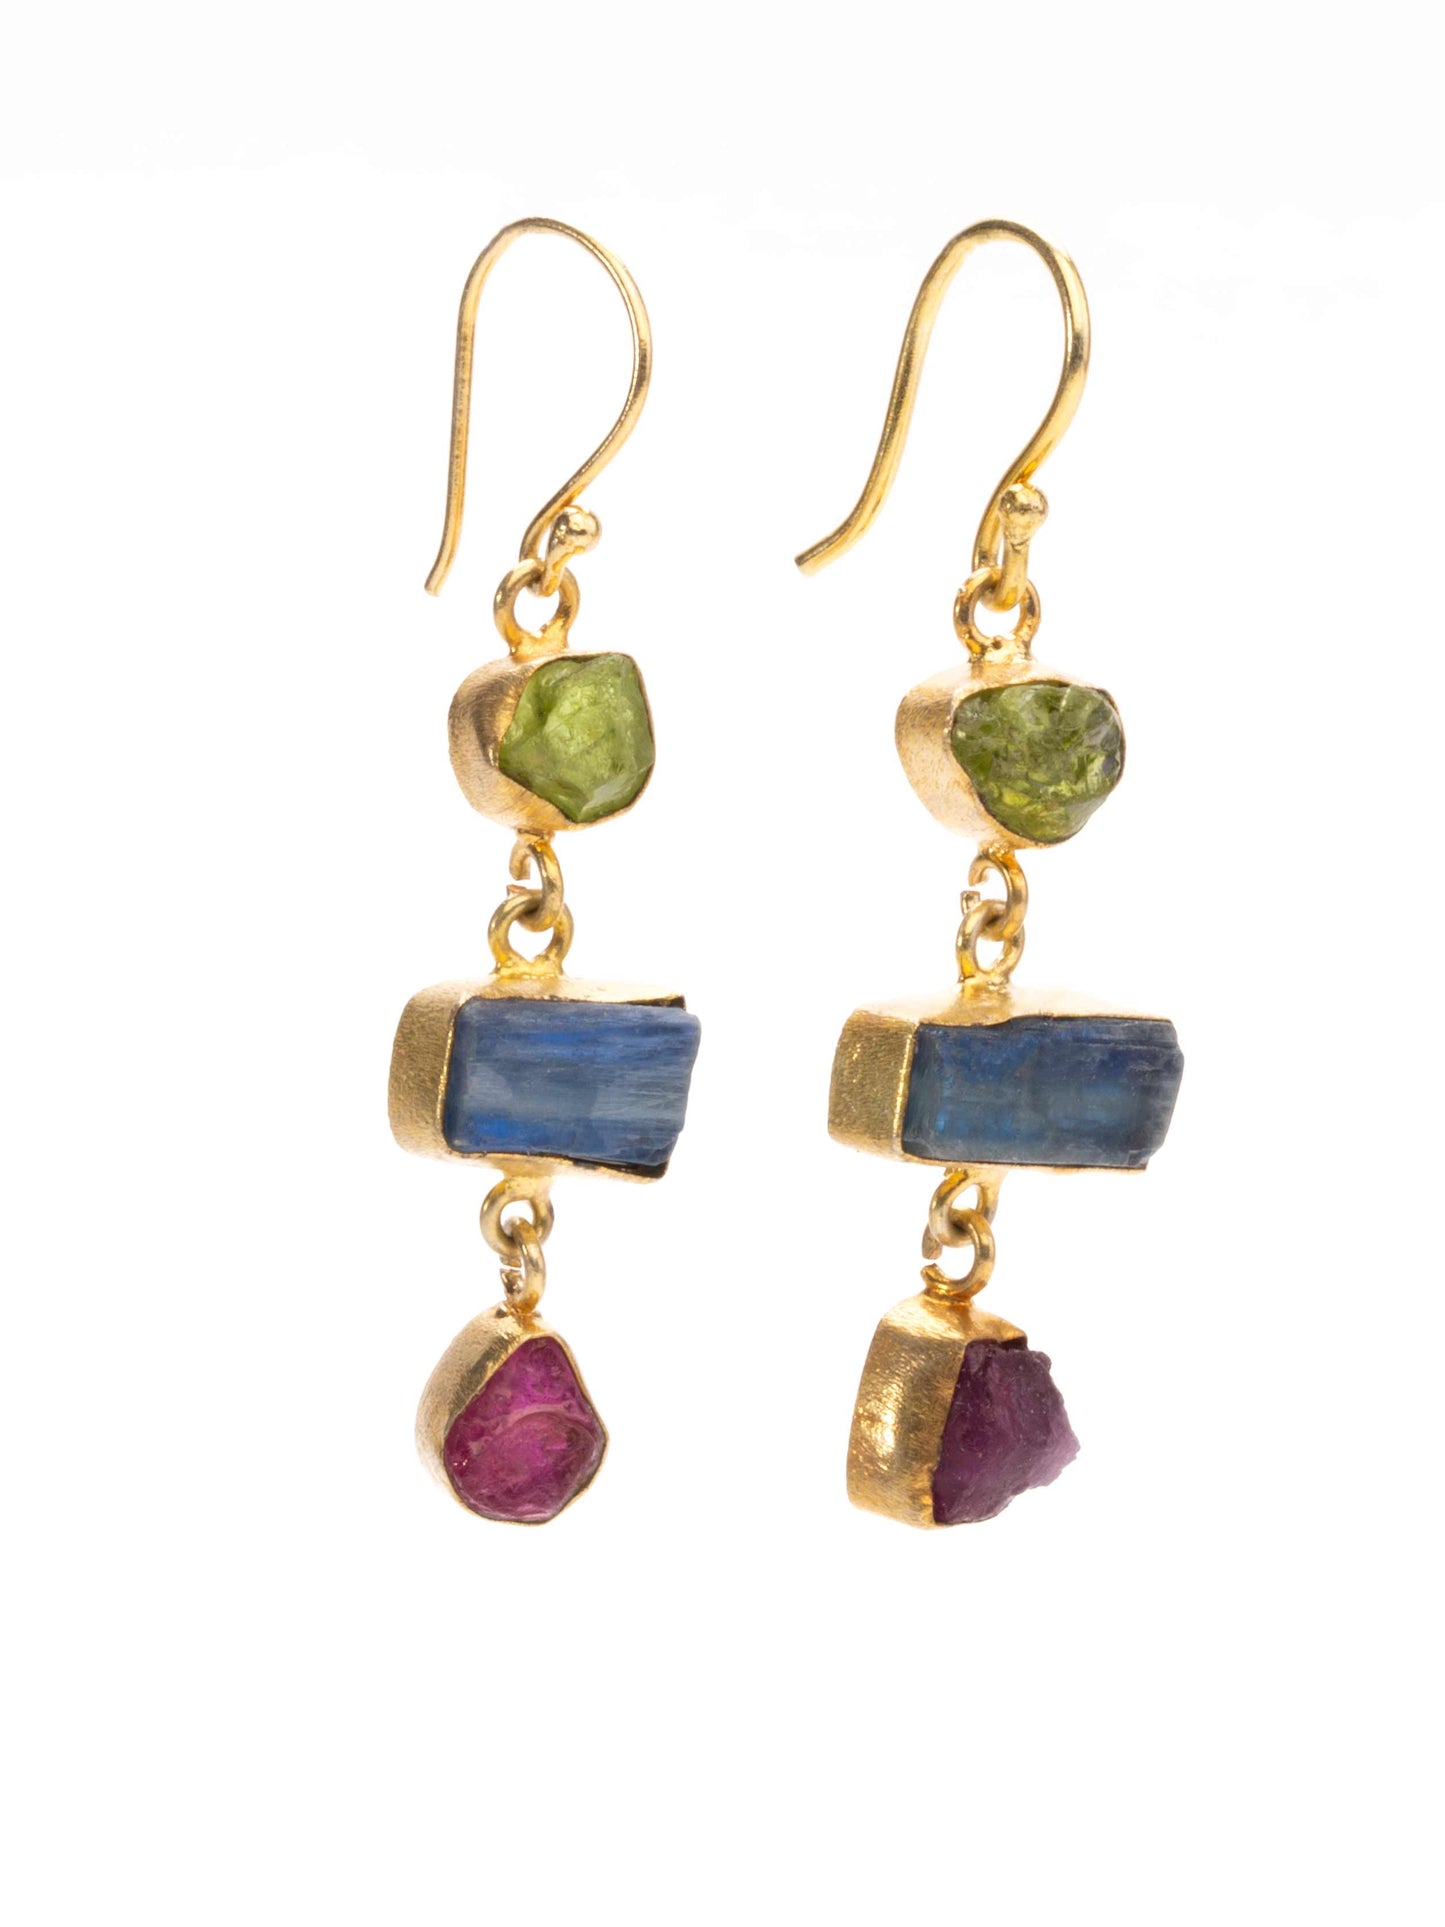 Gold luxe earrings with gemstones